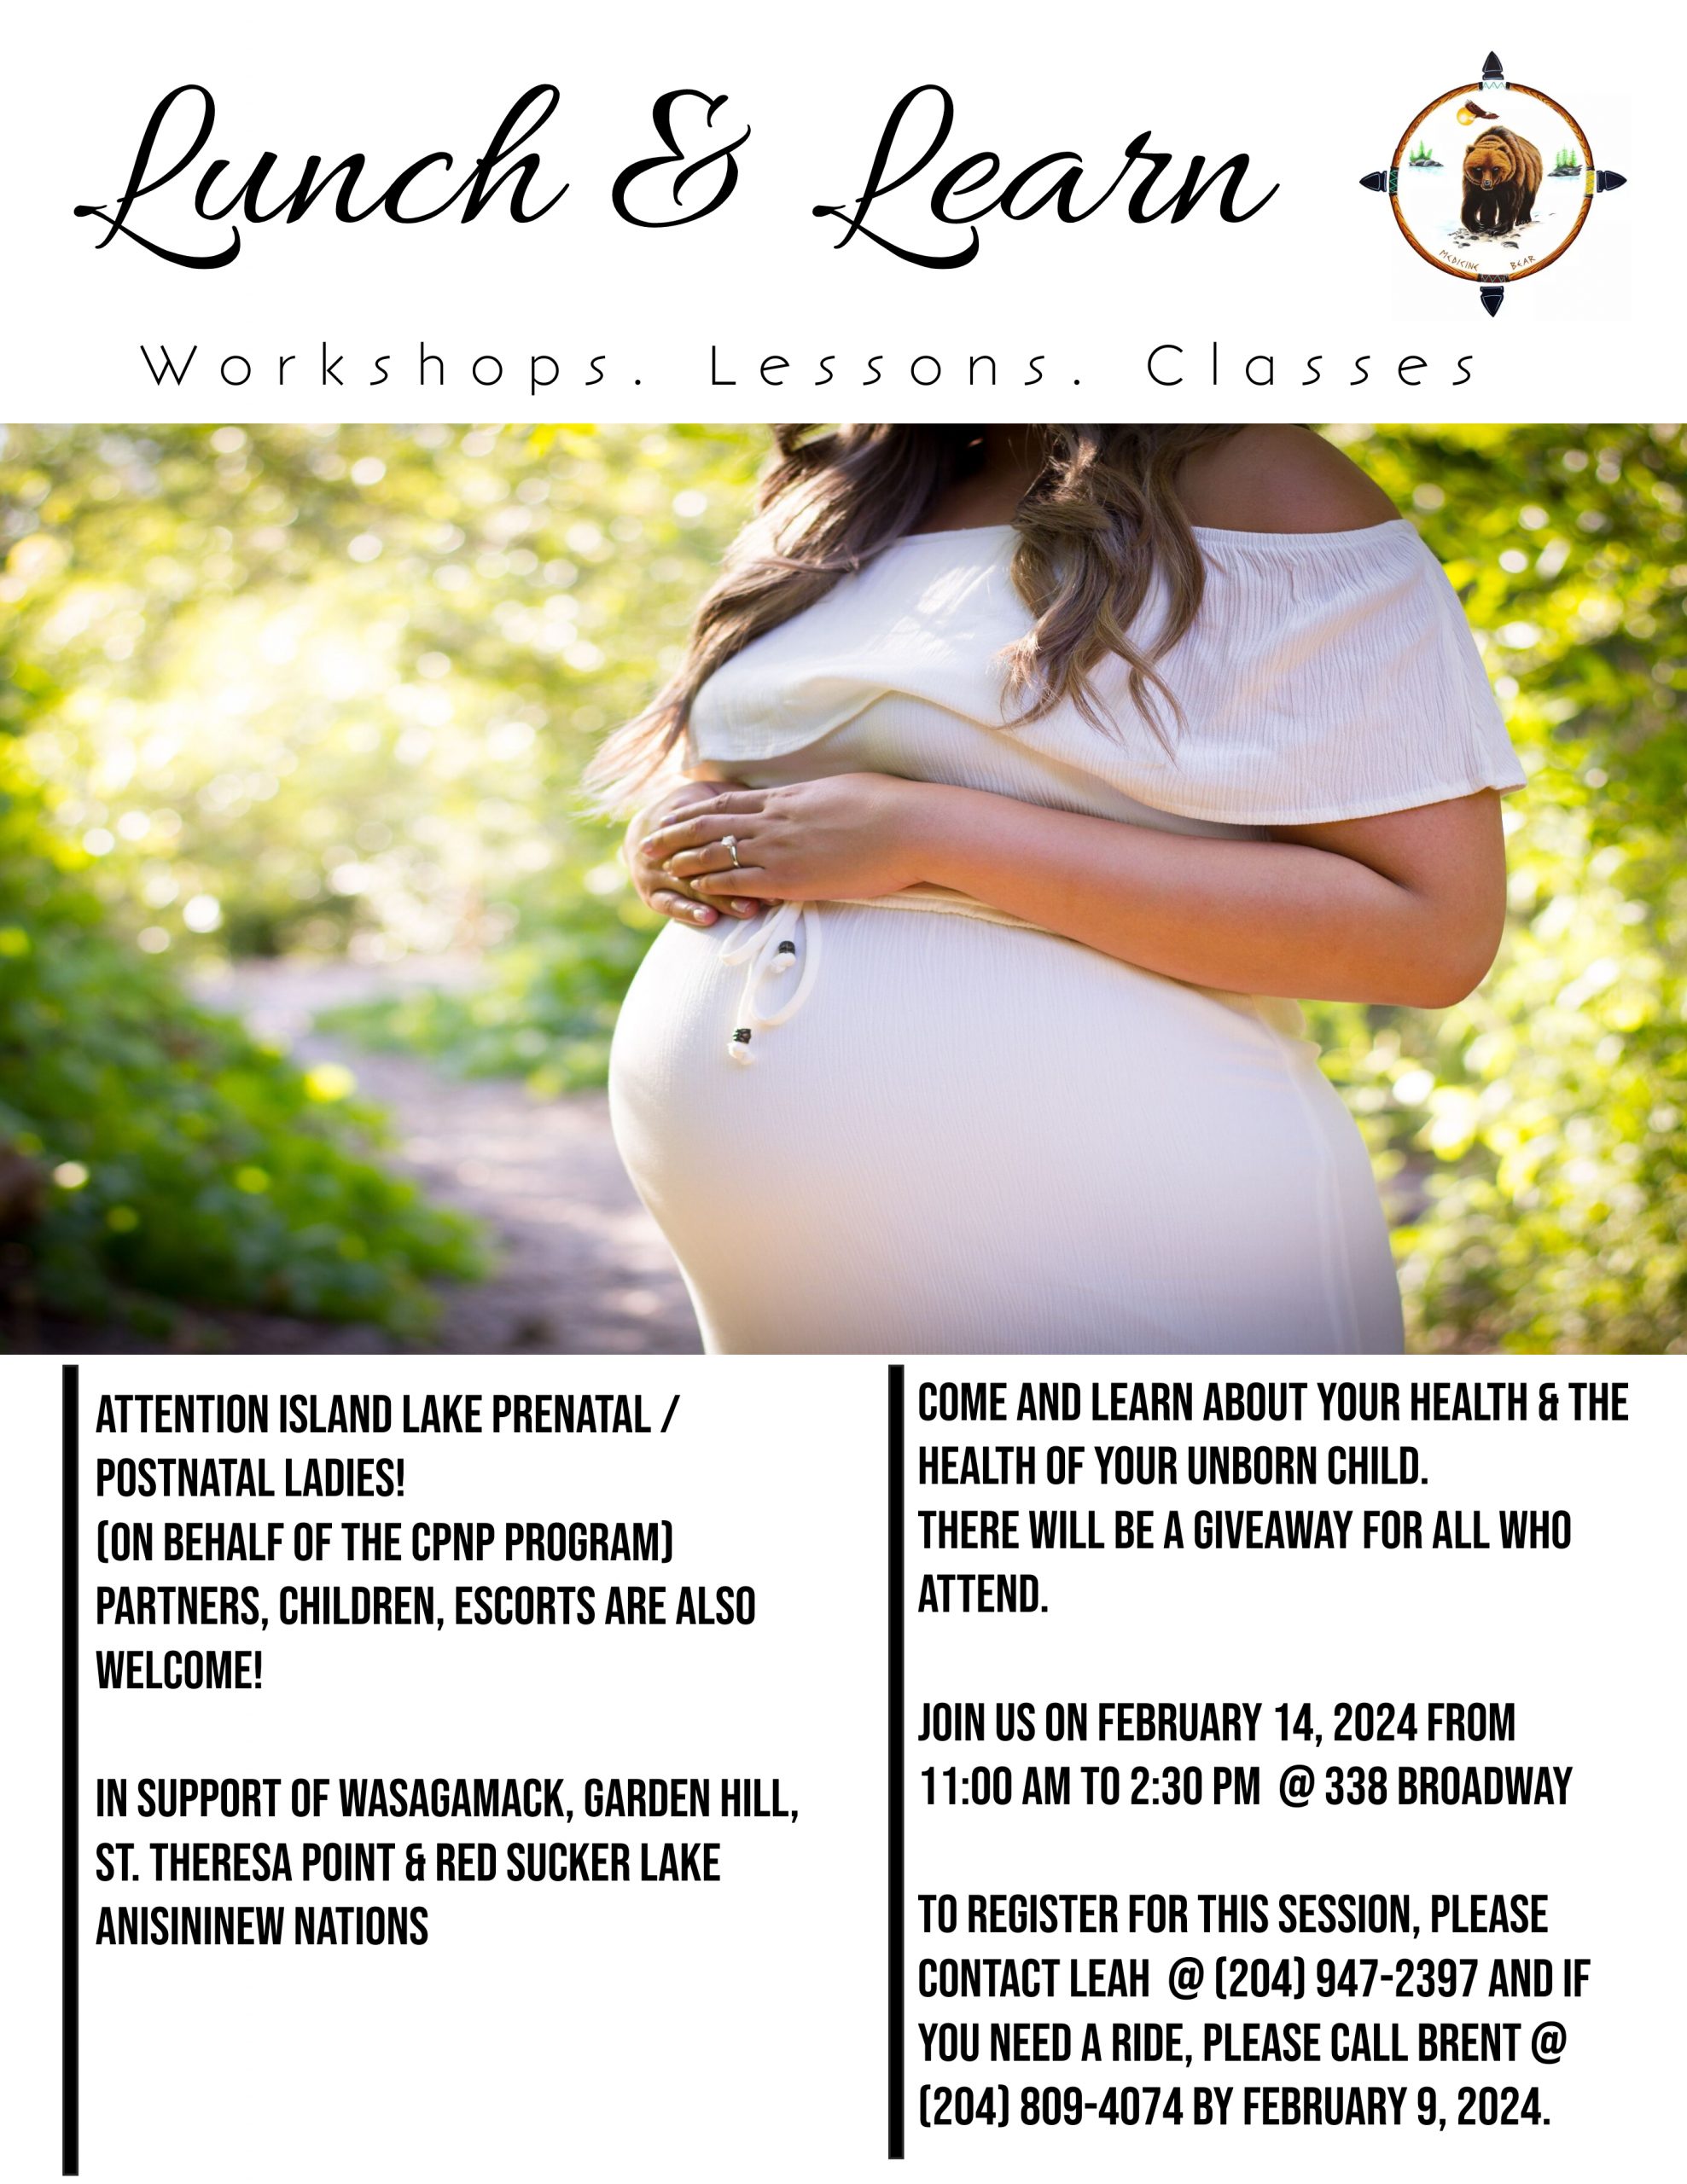 You are currently viewing Island Lake Prenatal/Postnatal Ladies, Partners, Children, and Escorts – Lunch & Learn Workshop – February 14, 2024